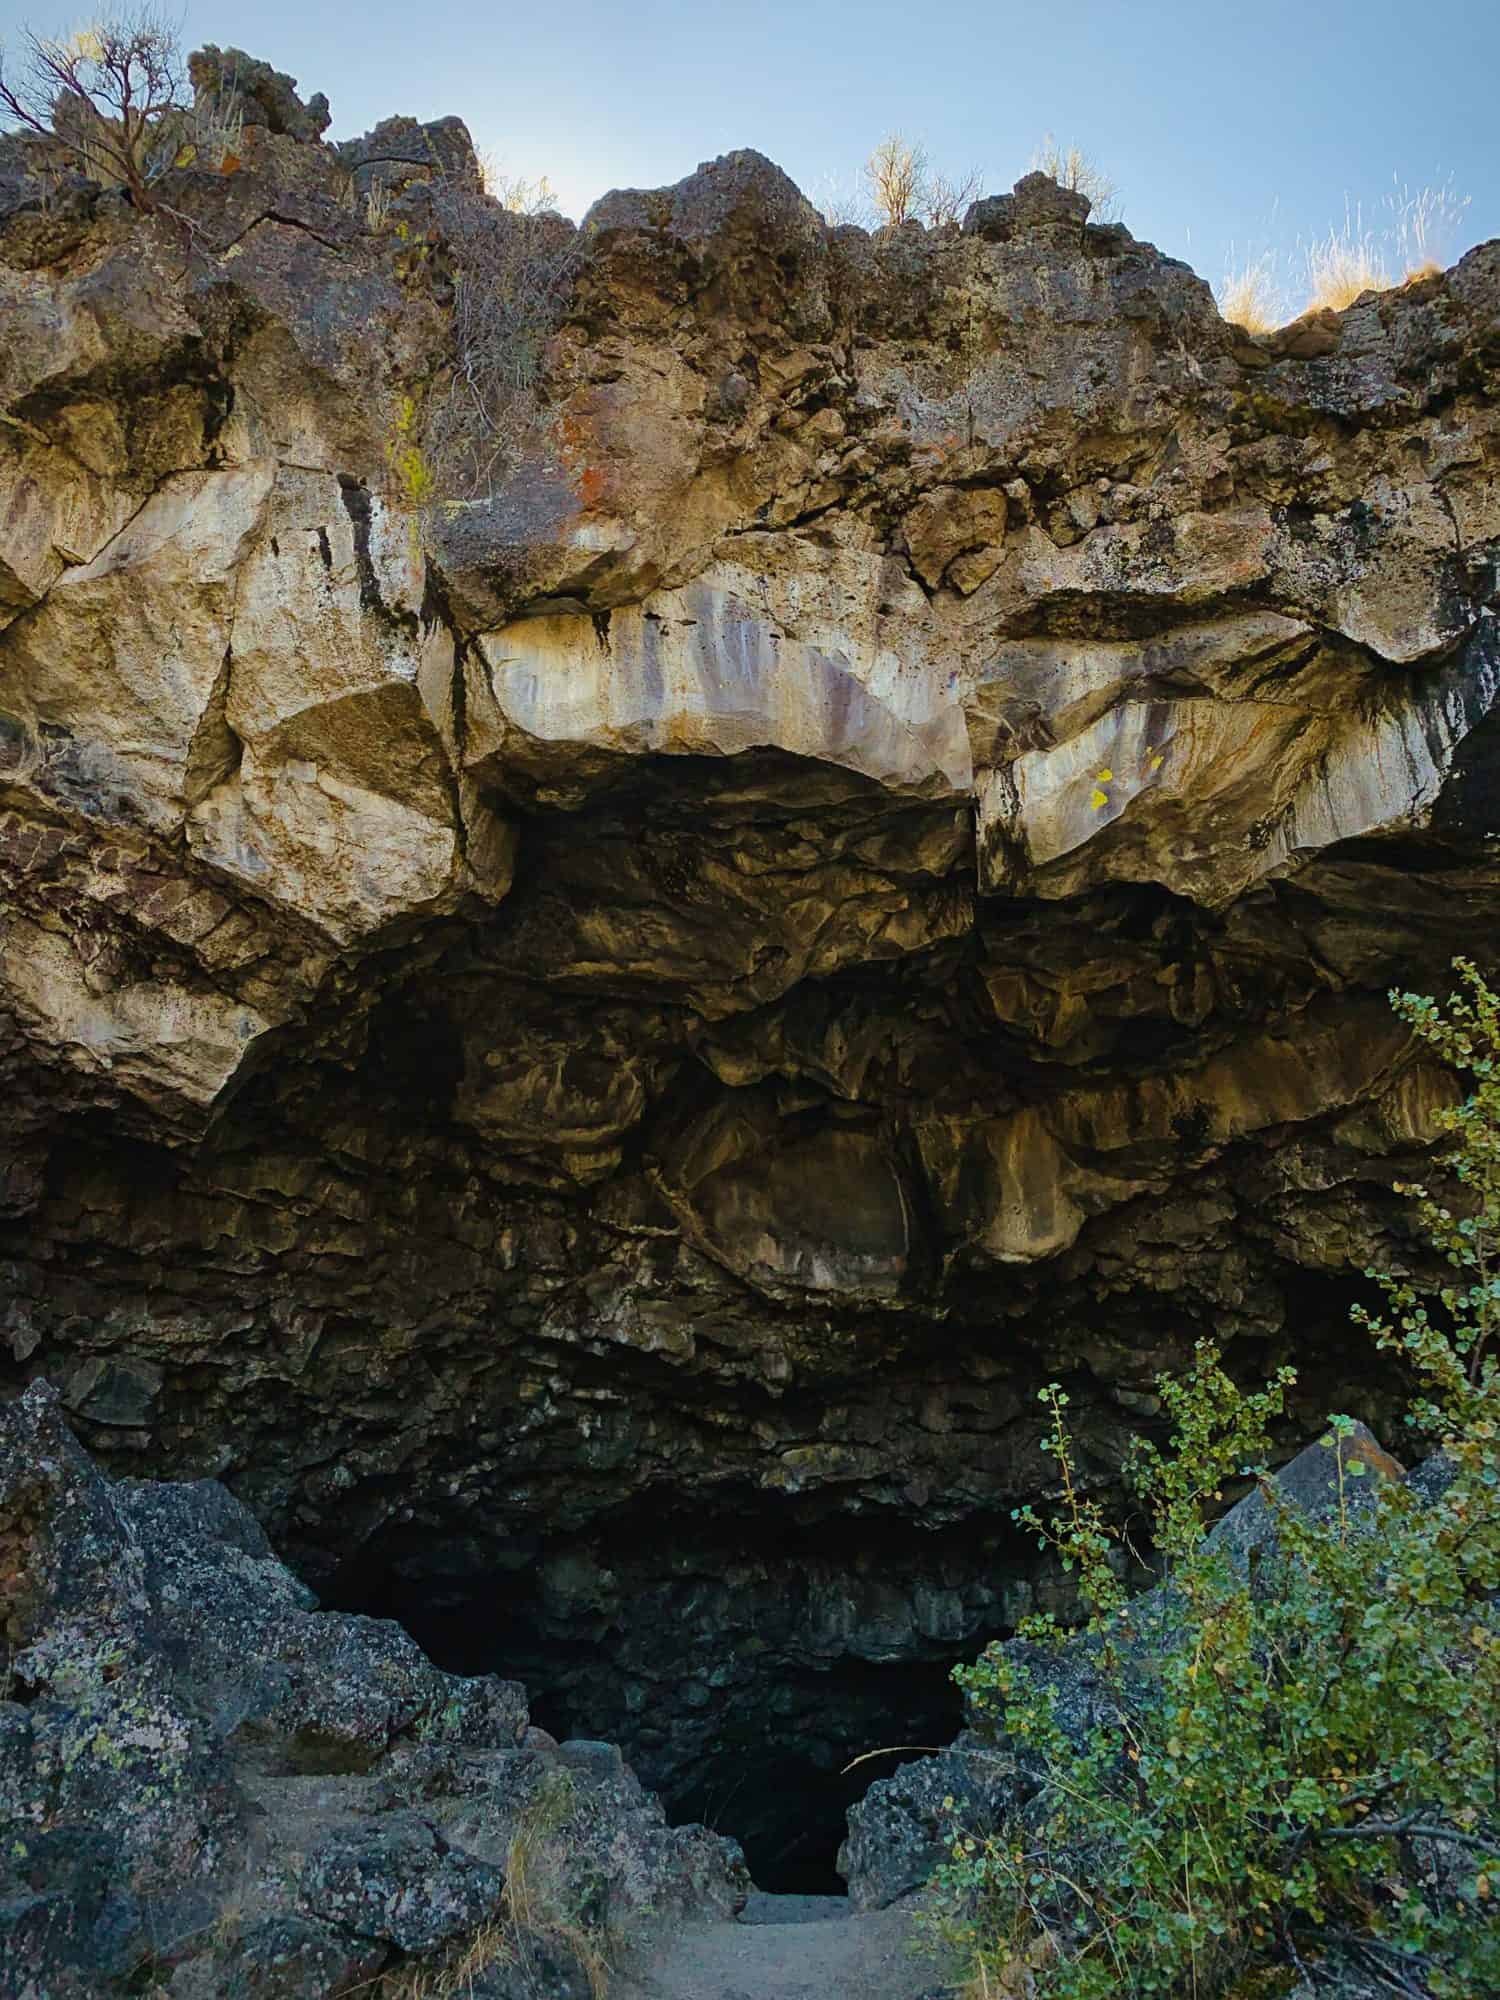 Entrance to Indian Well Cave, Lava Beds National Monument